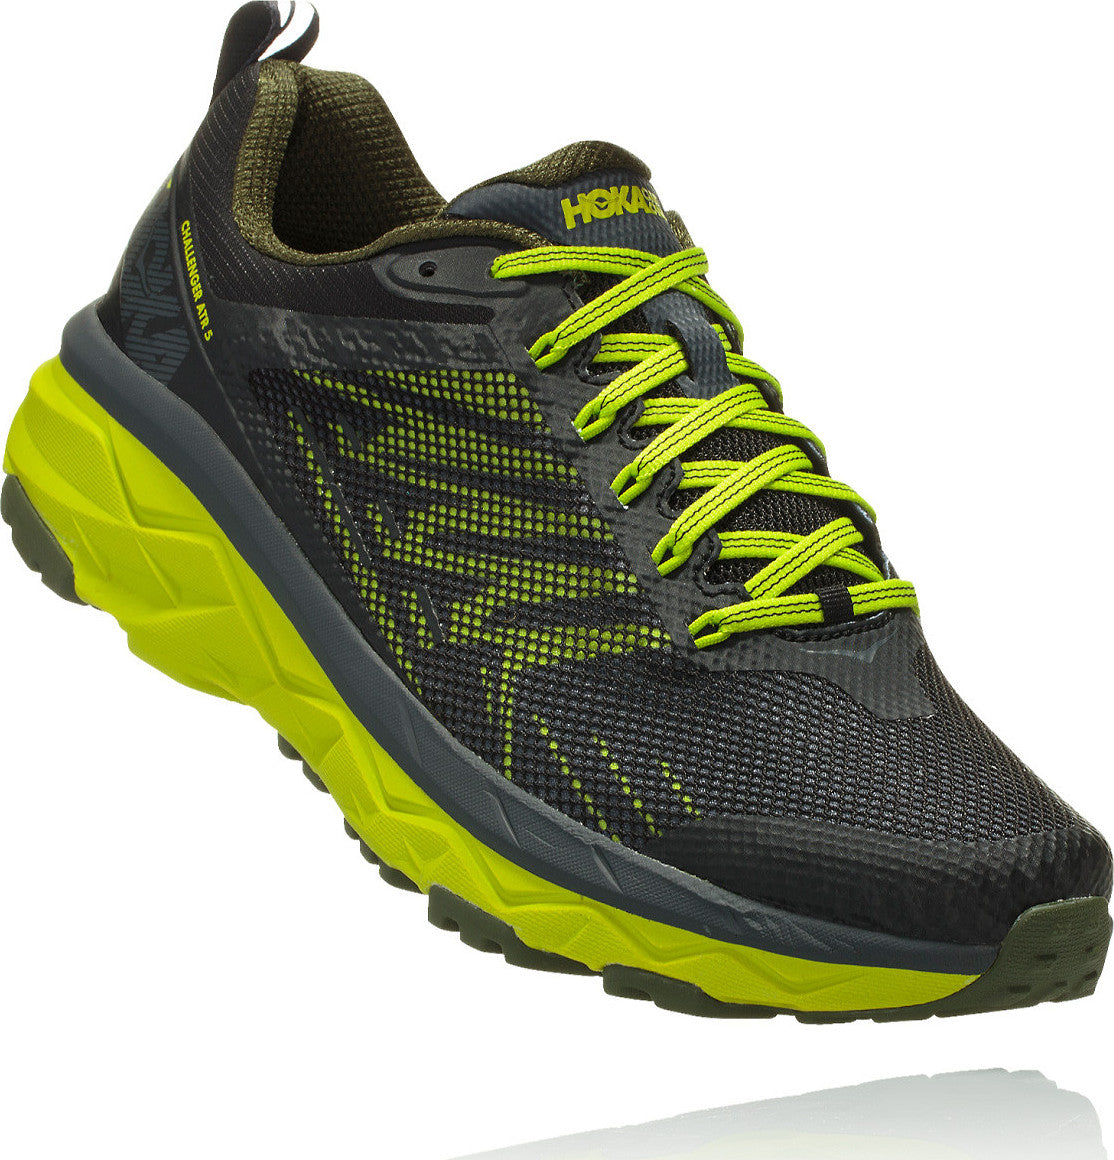 Hoka One One Challenger Atr 5 Running Shoes - Men's | Altitude Sports